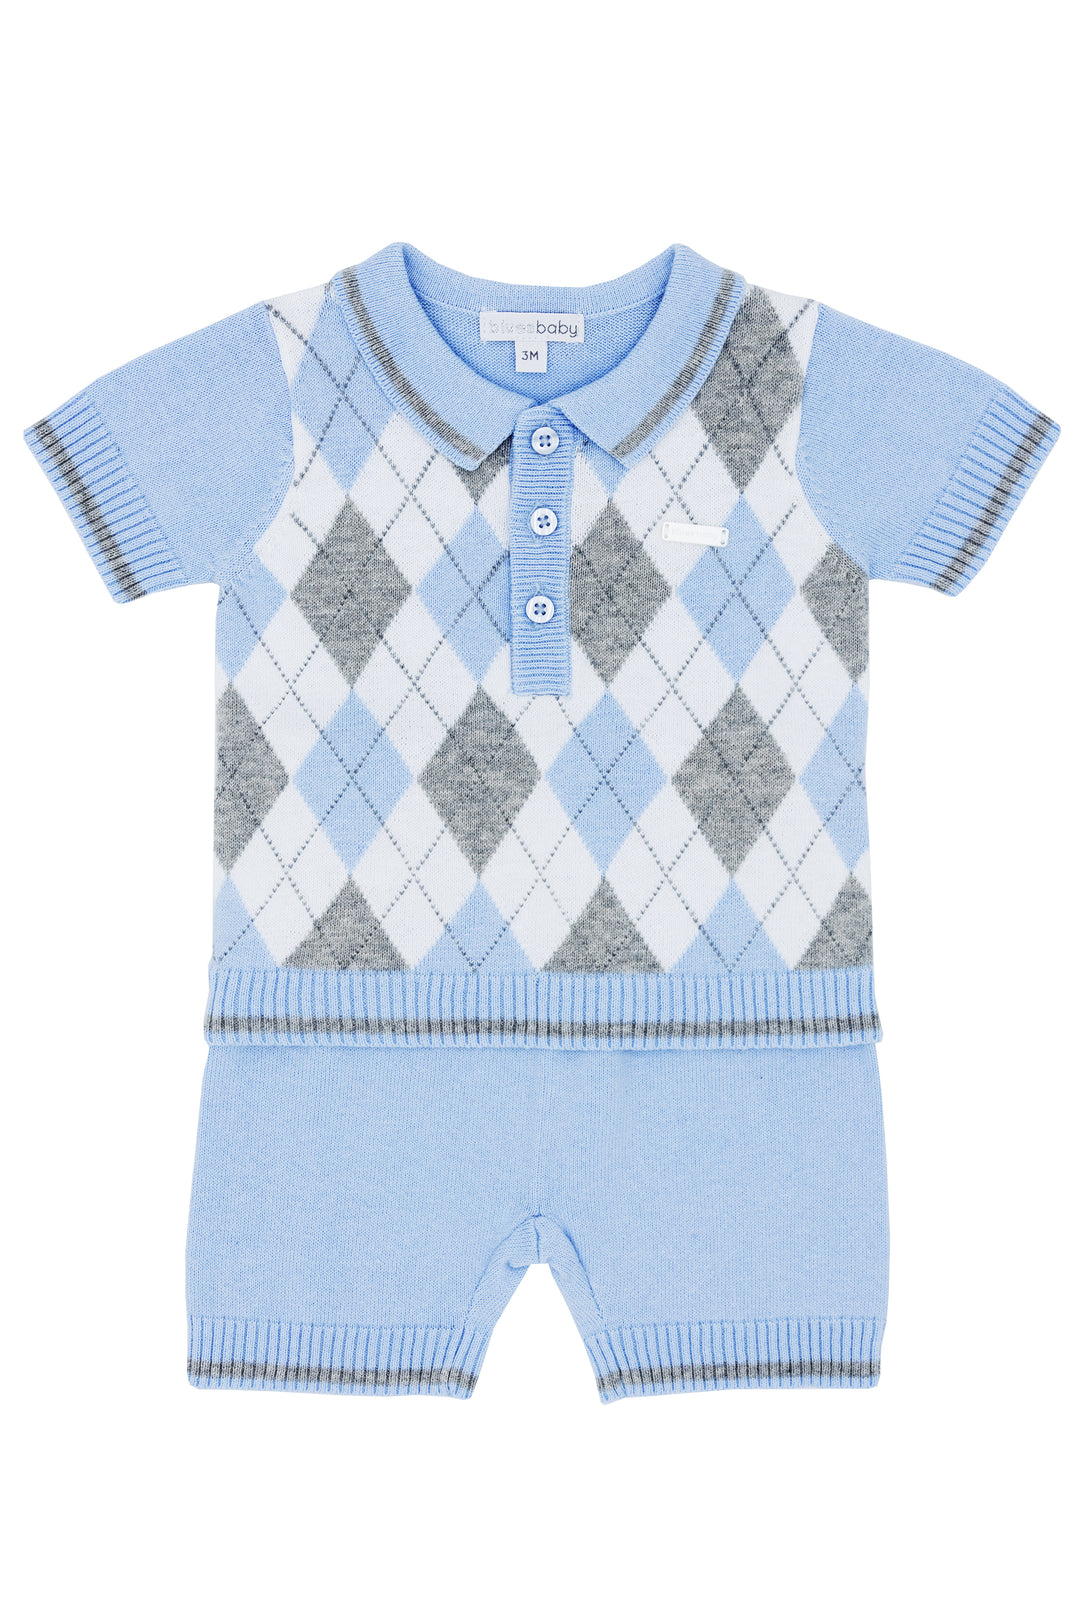 Blues Baby PREORDER "Charlie" Blue & Grey Argyle Knit Polo Shirt & Shorts | Millie and John